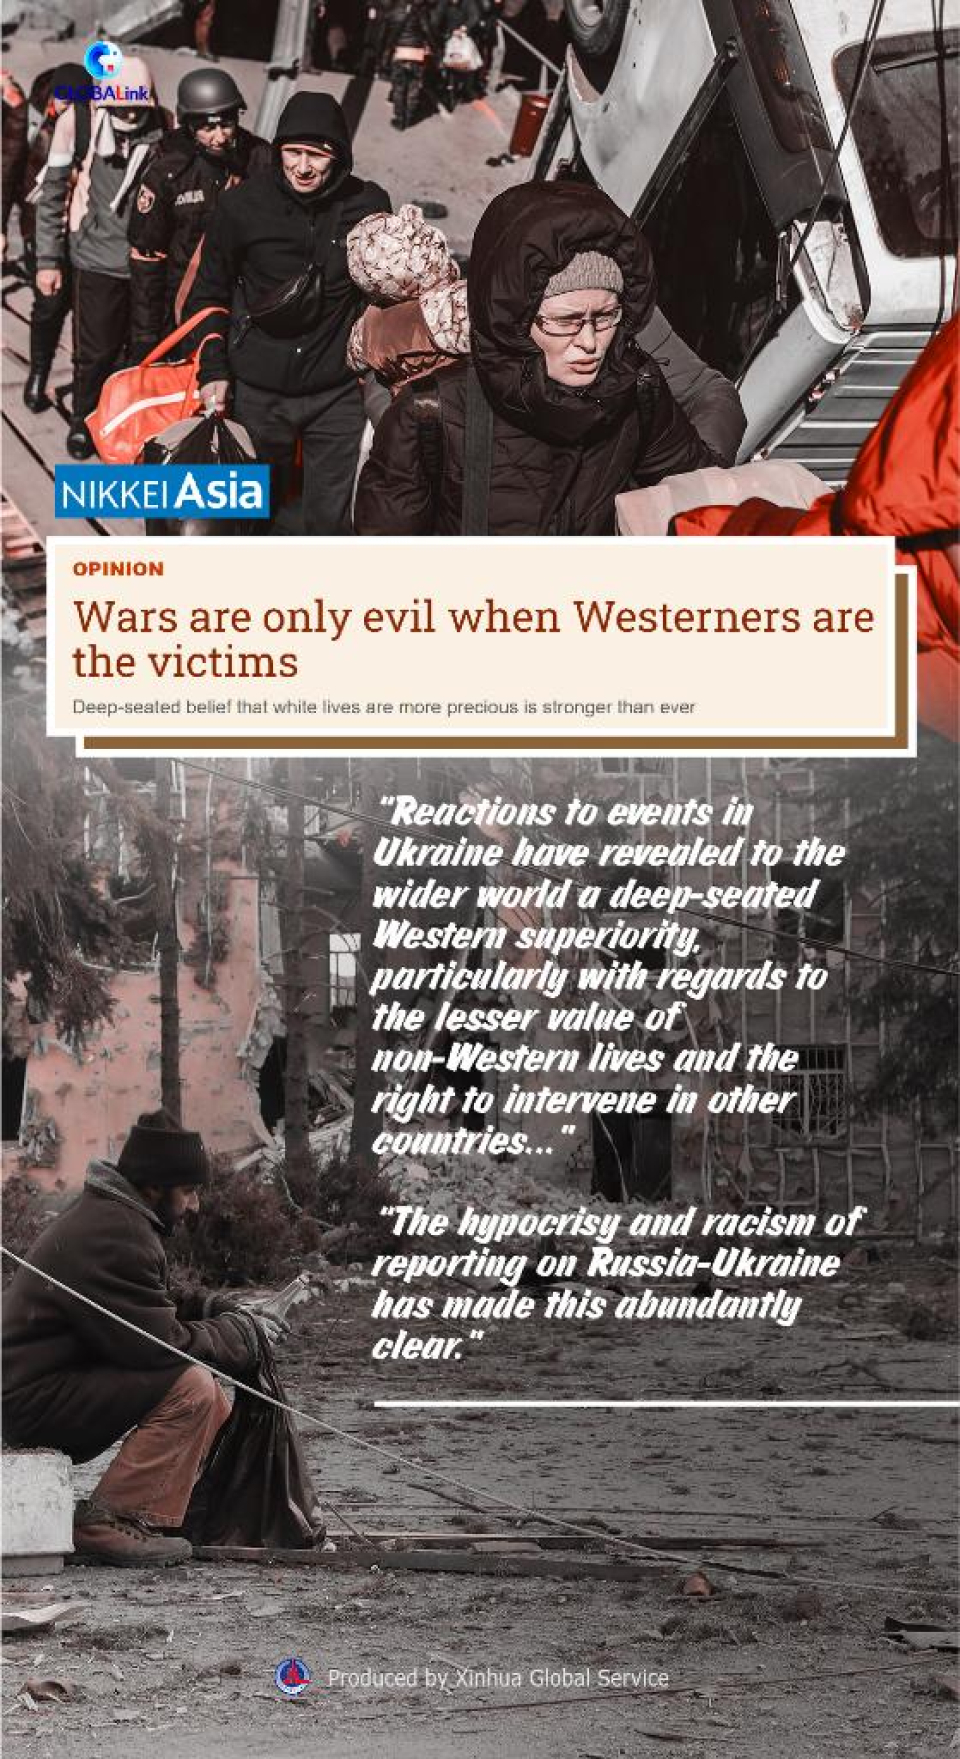 Wars are only evil when Westerners are victims: Opinion